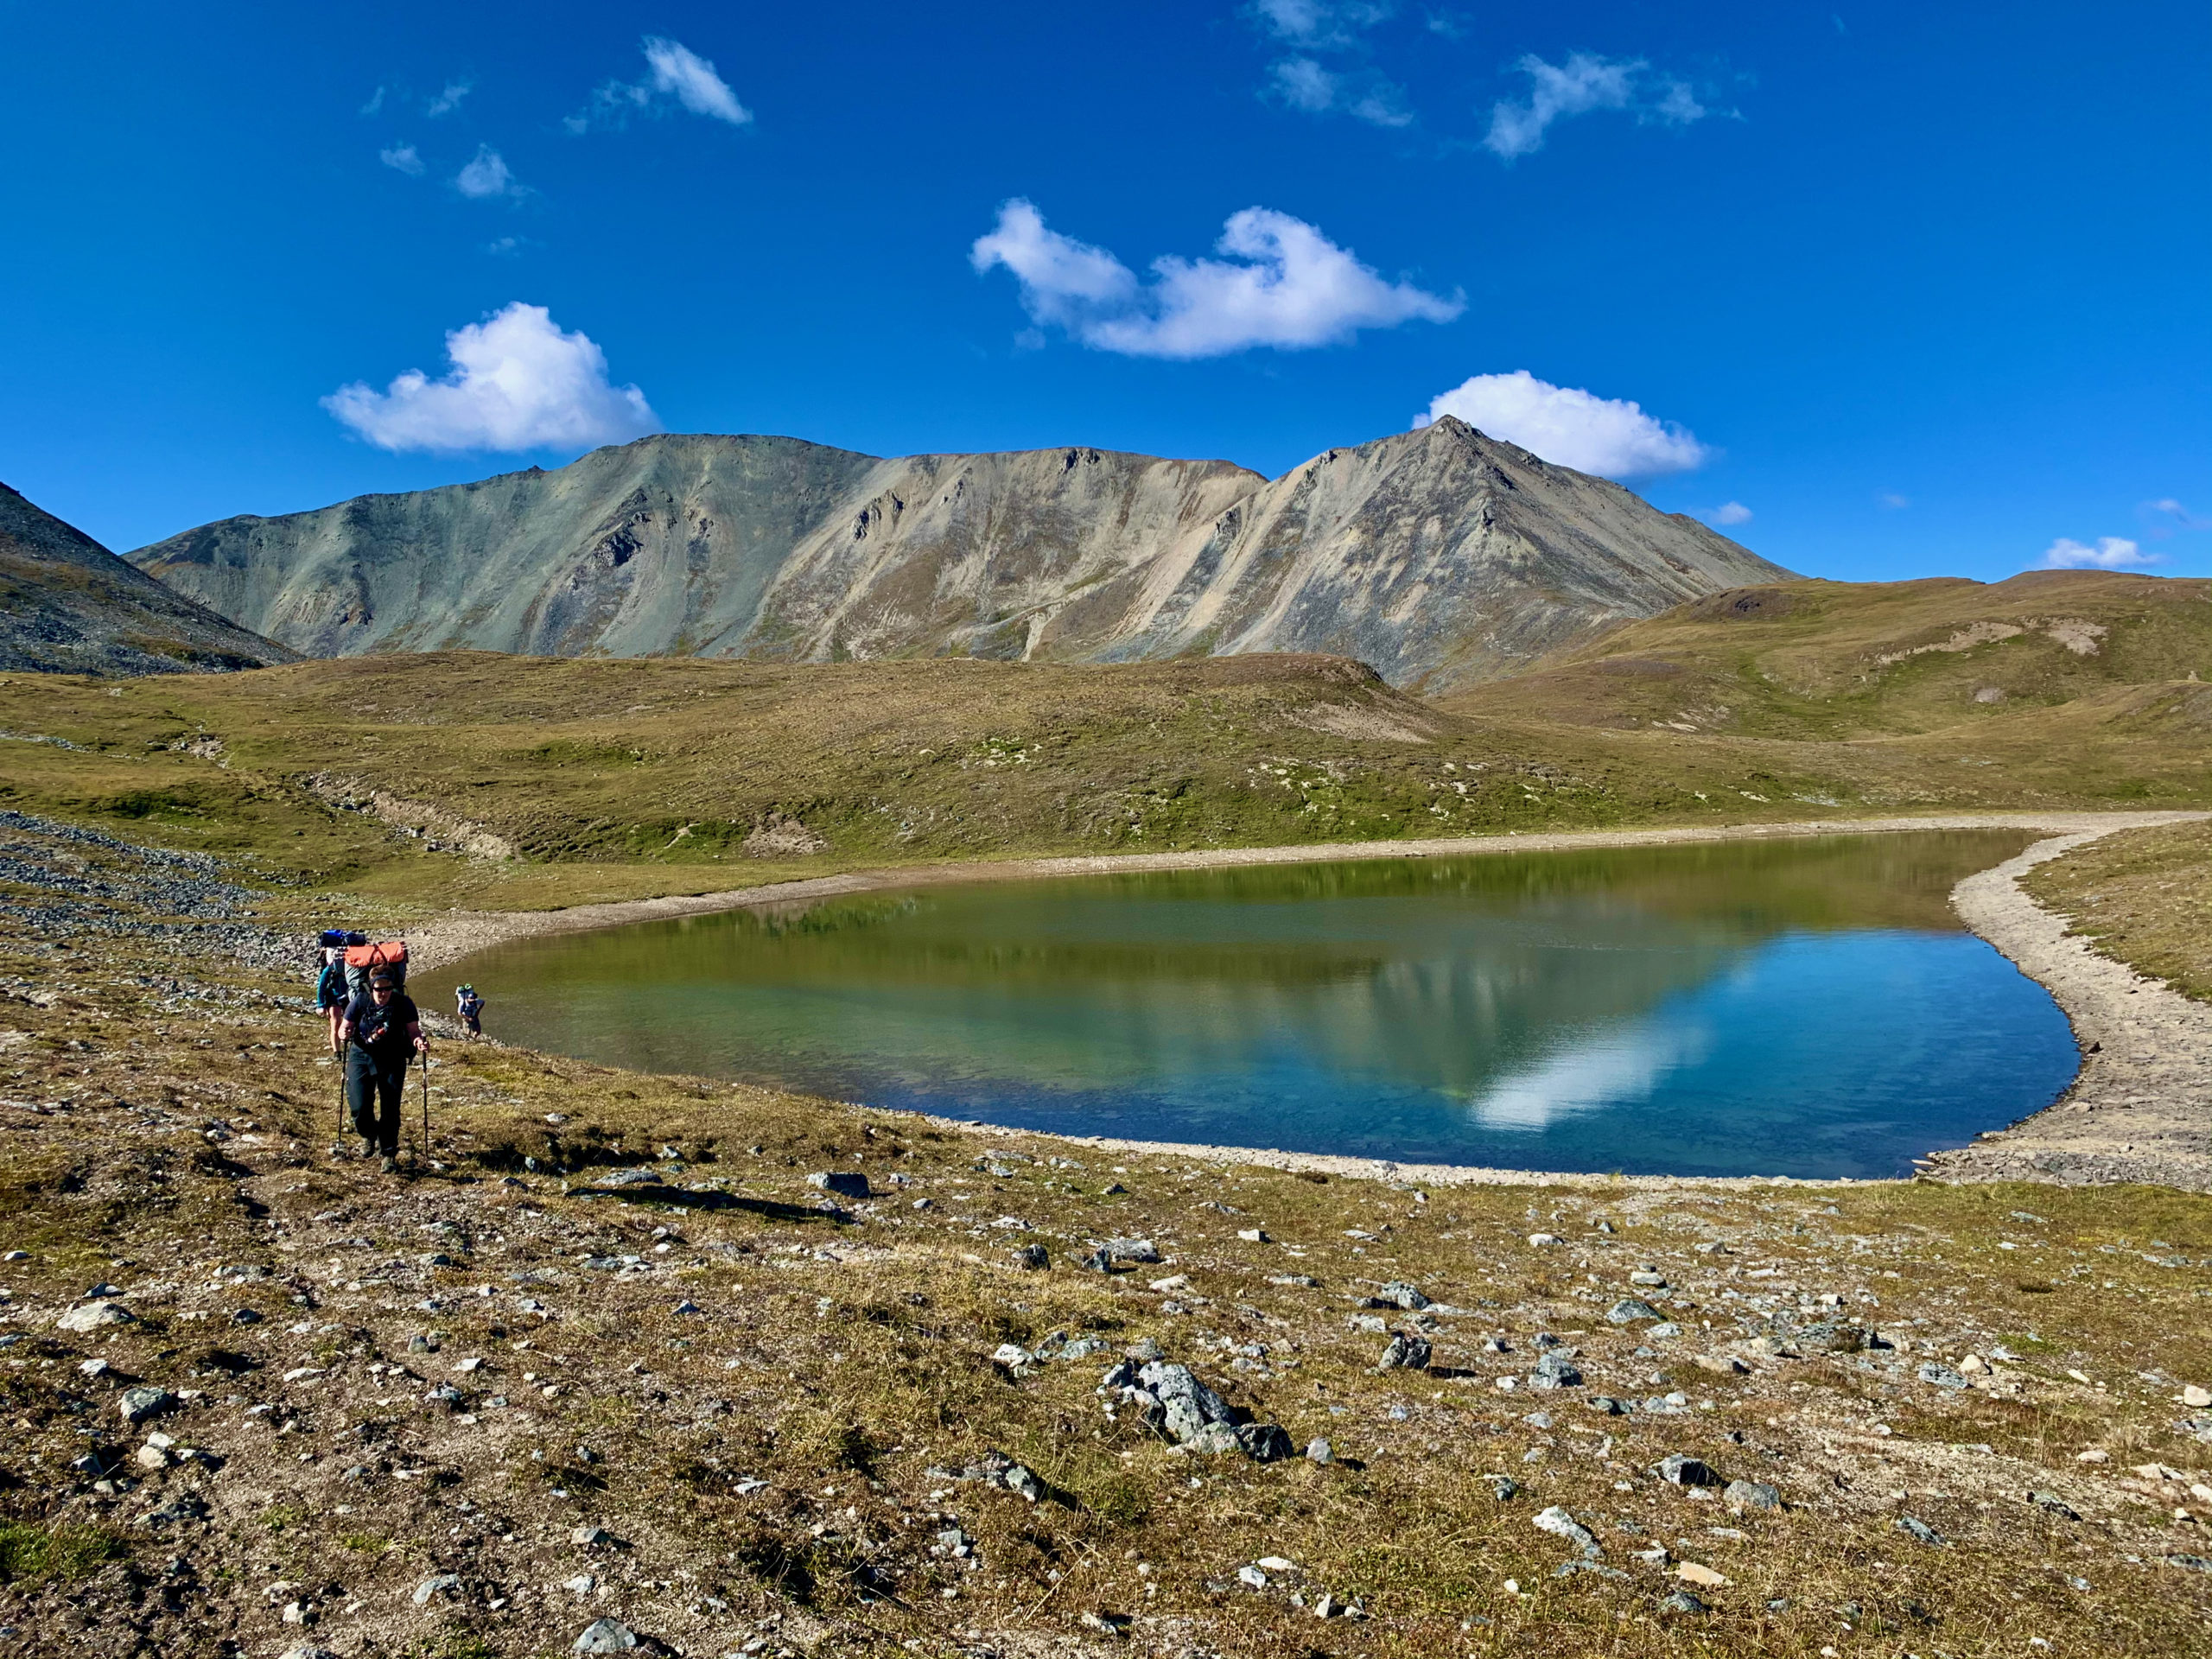 Backpackers near an alpine lake in the Talkeetna Mountains